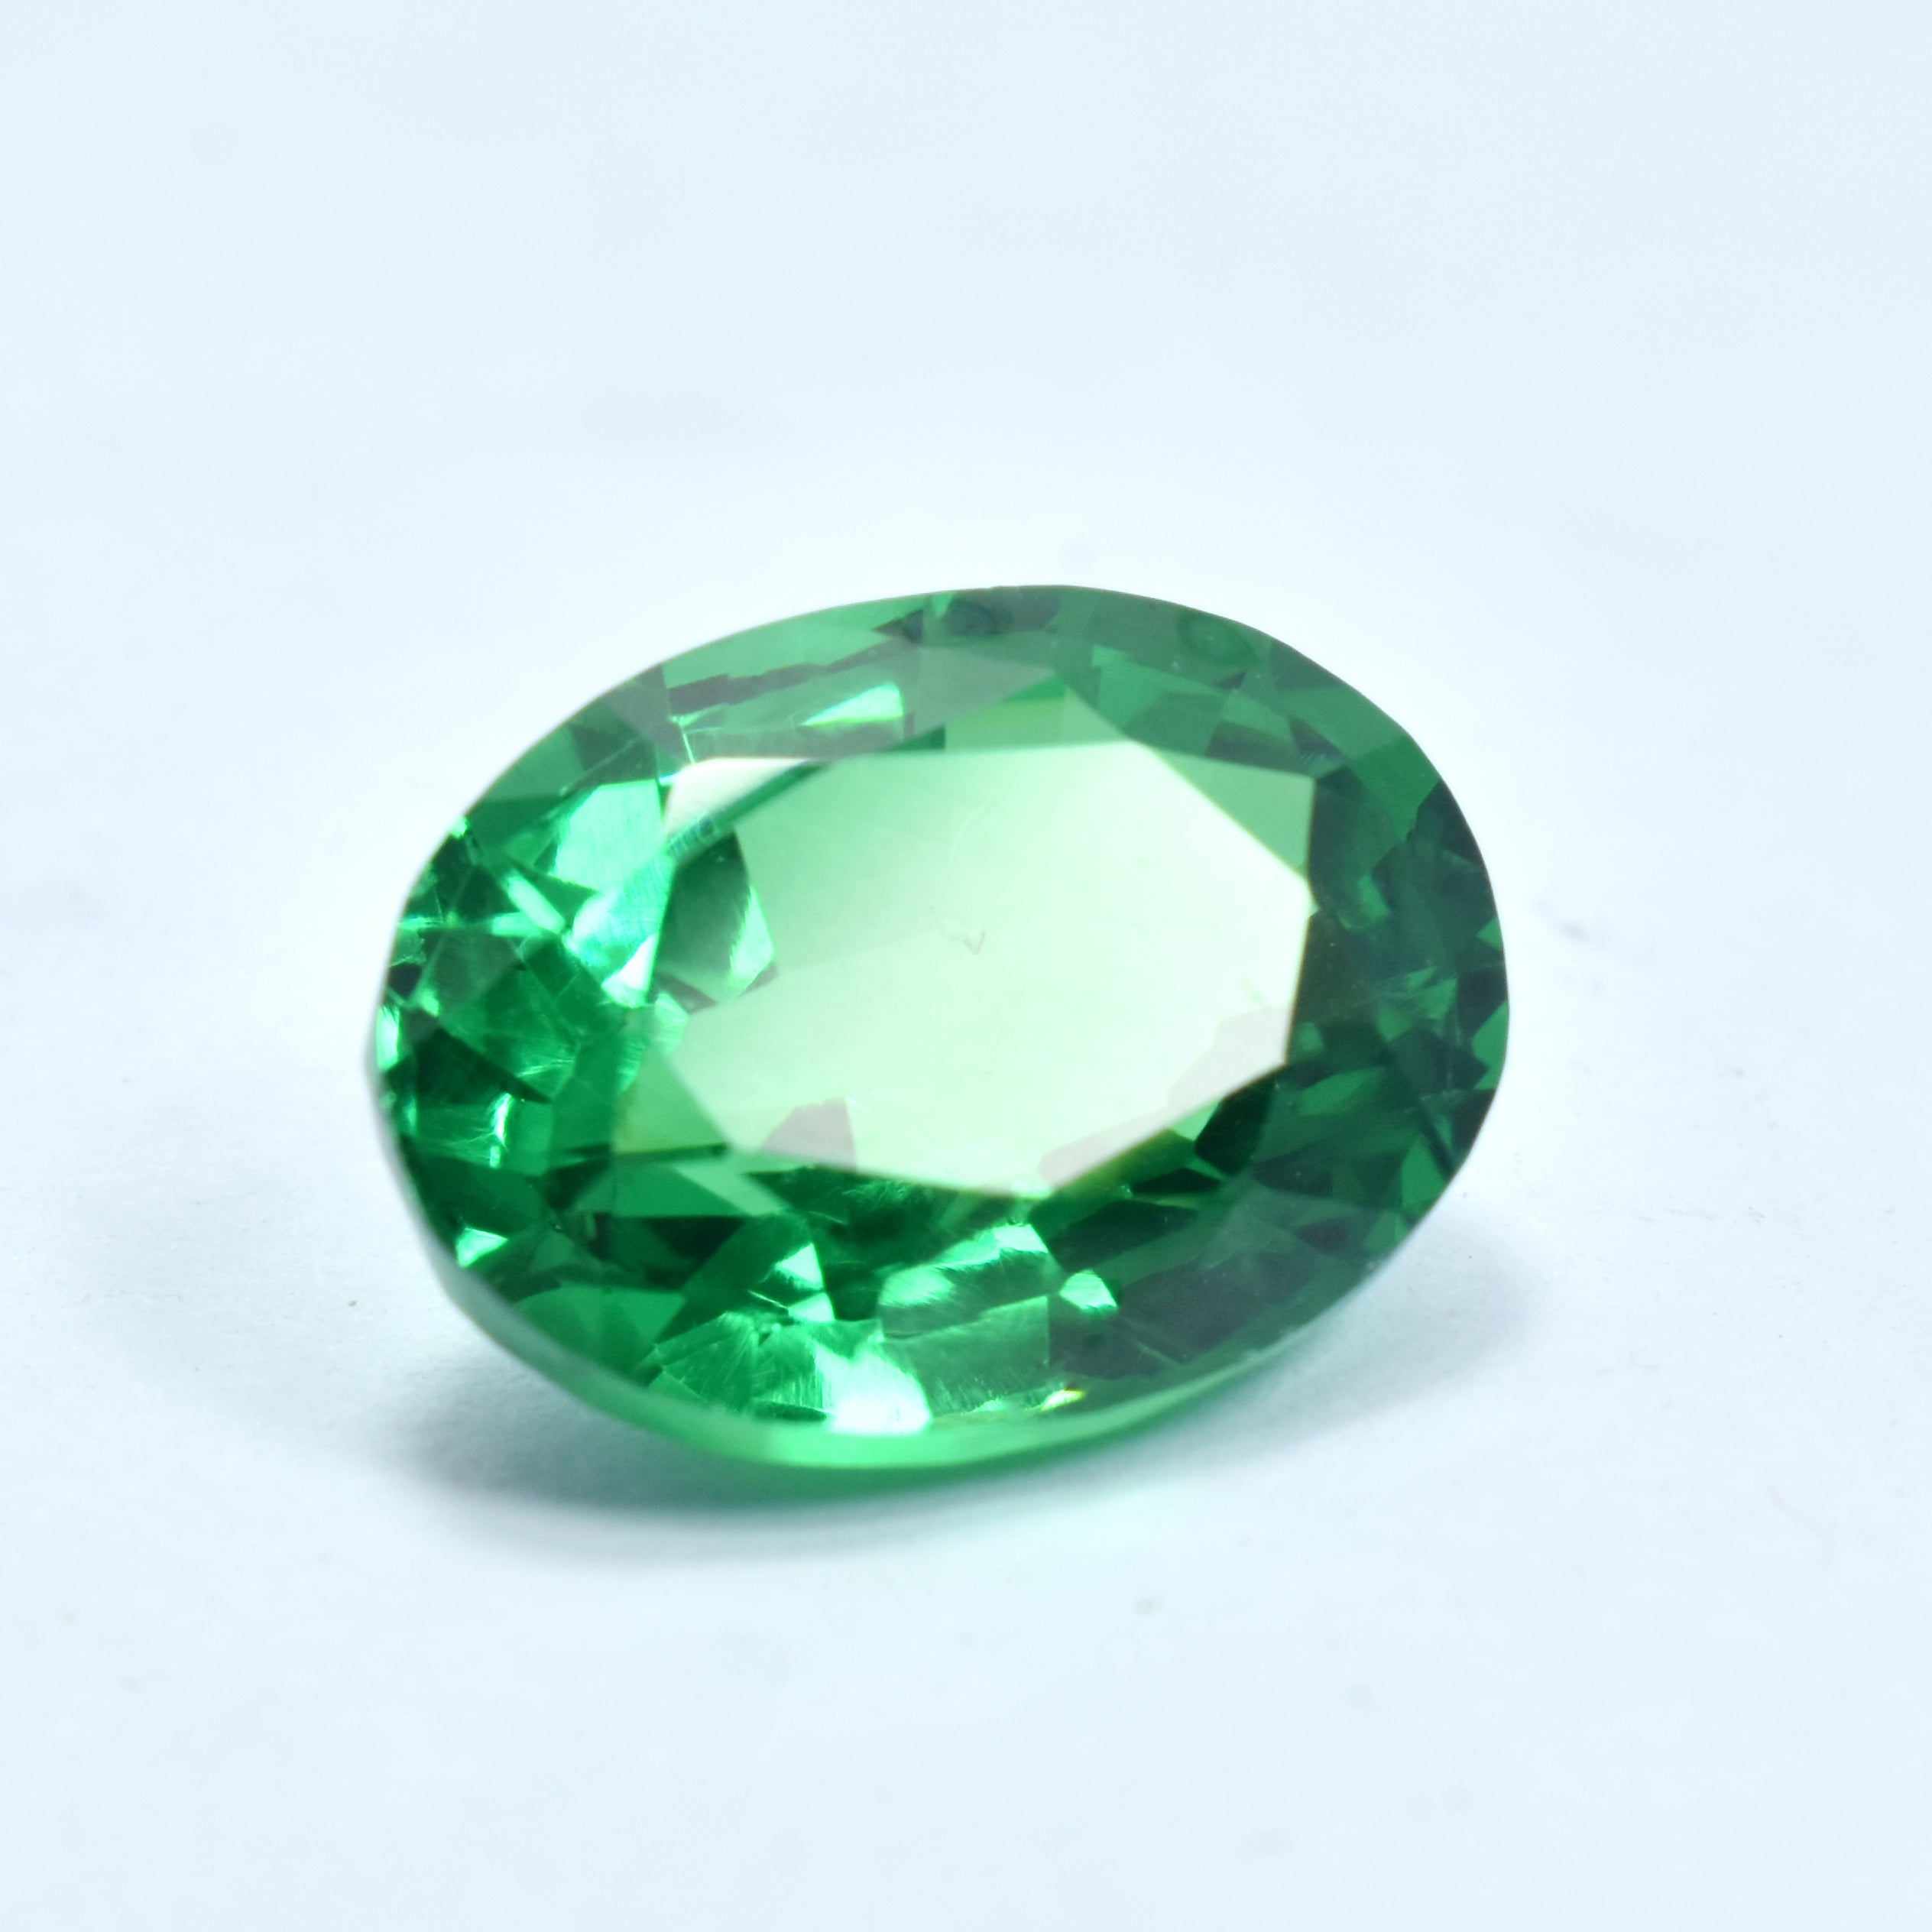 Garnet Jewelry Specially For Bride , 8.99 Carat Green Garnet Oval Shape Natural Certified Loose Gemstone | Gift With Free Delivery | GARNET- Protection & Mentally Fit